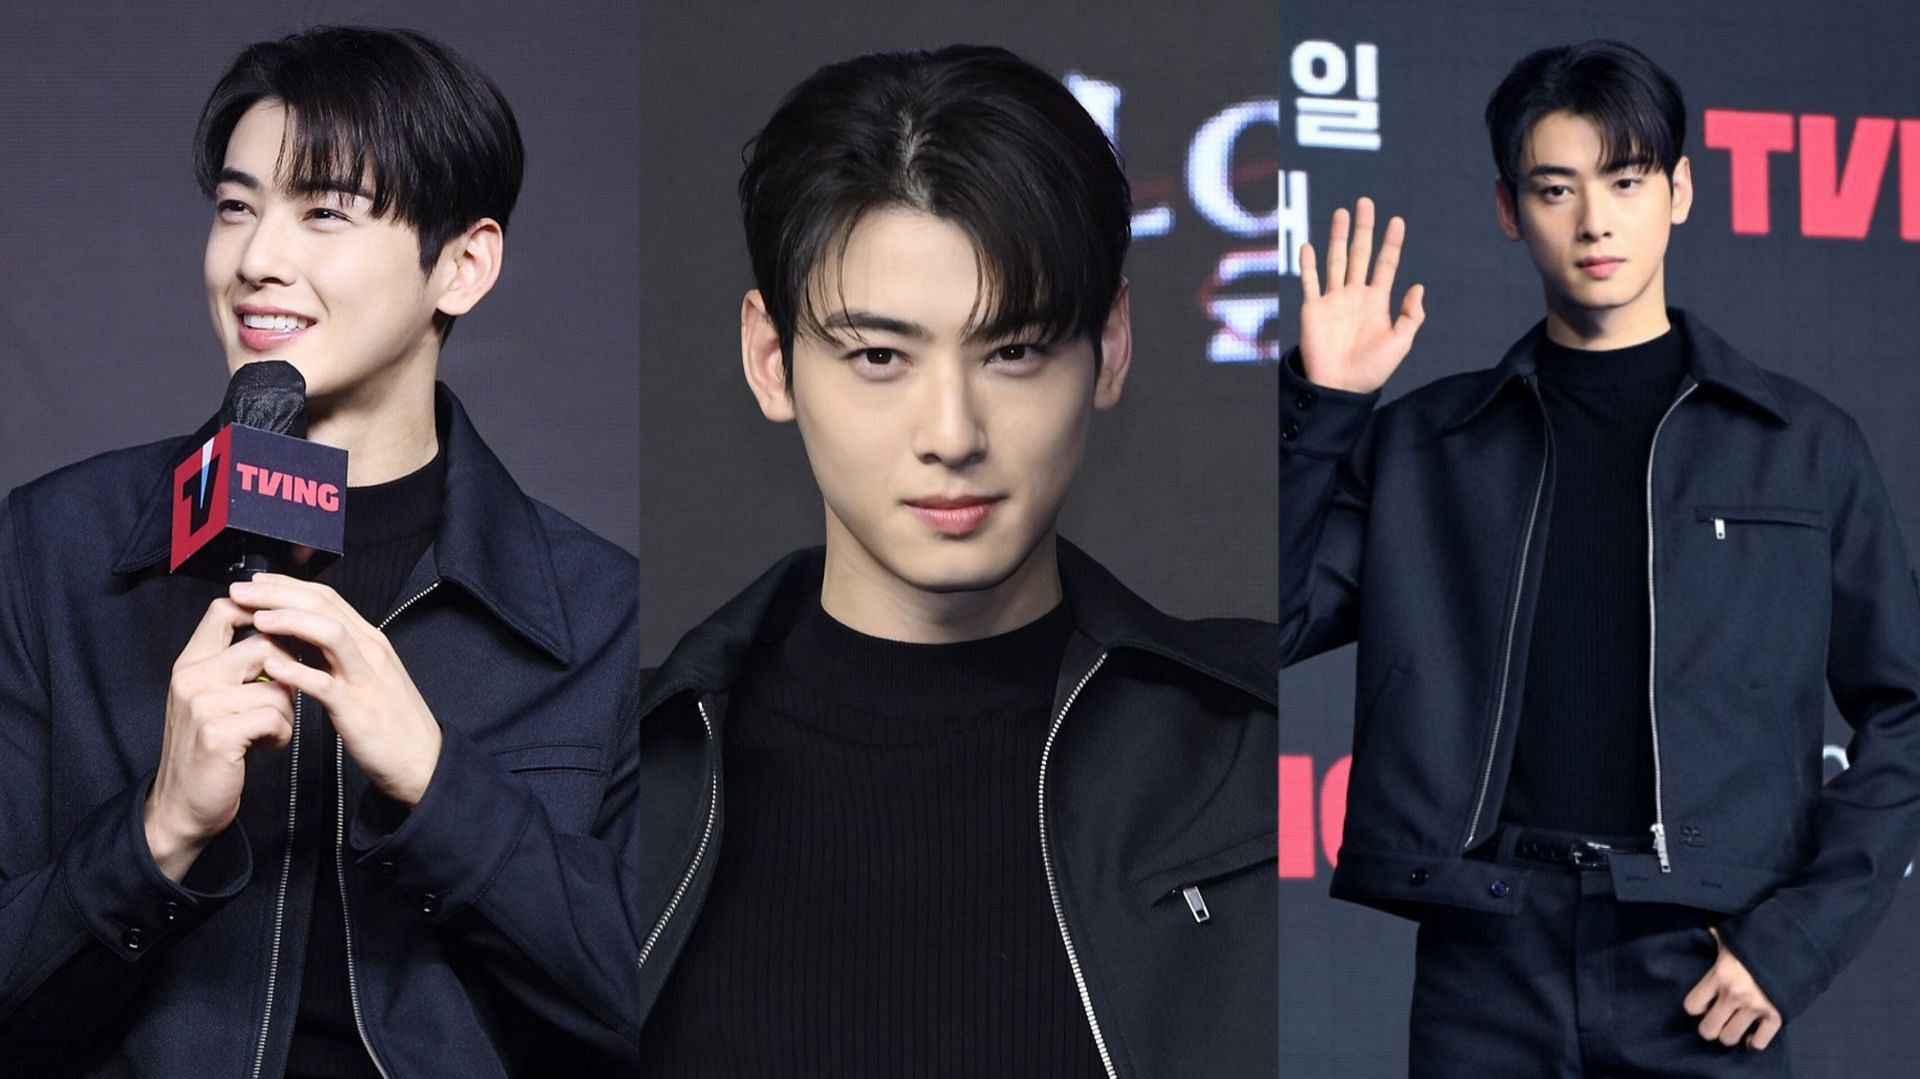 “cha Eun Woo X Island Is Coming” Trends On Twitter As The Actor Attends The Press Conference For 1627